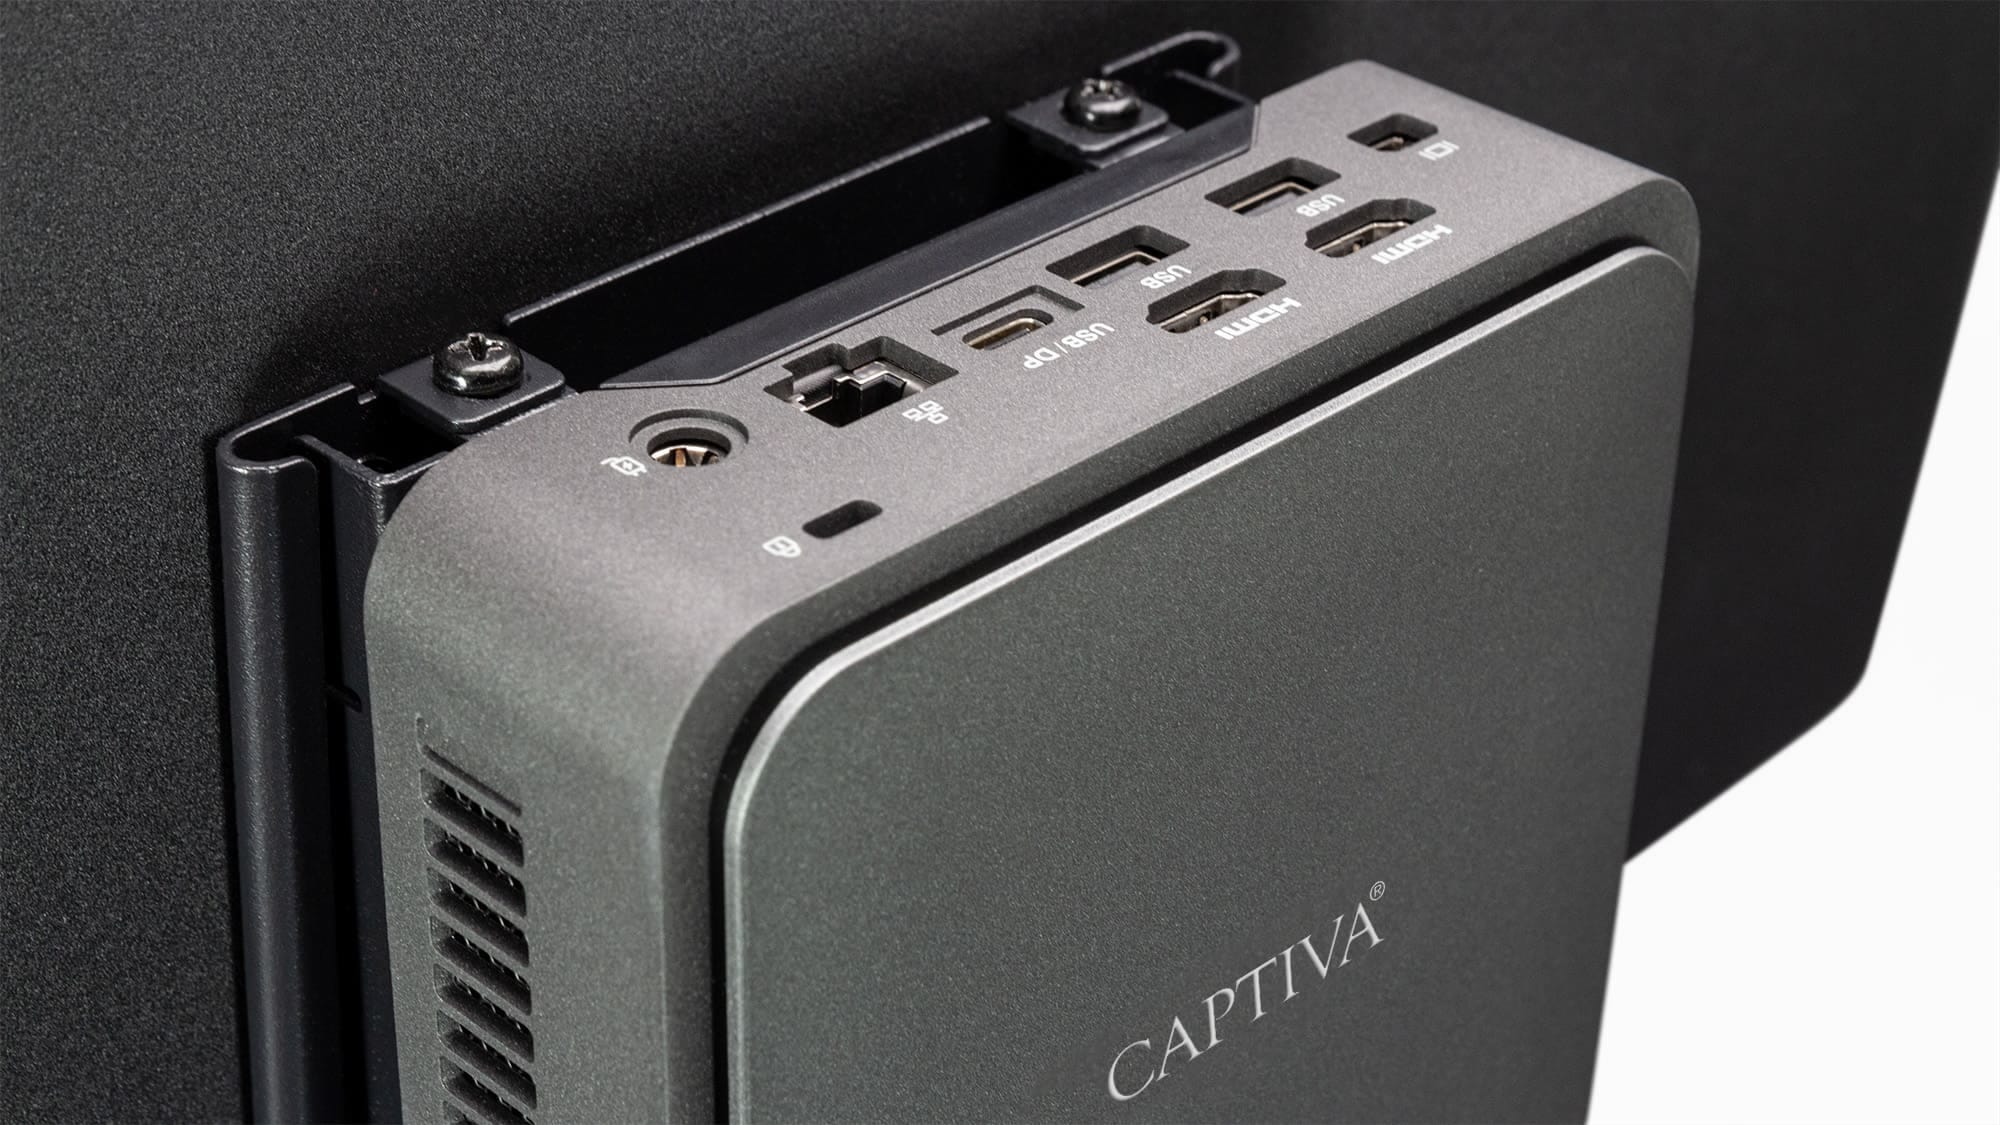 CAPTIVA All-in-One PC »All-In-One Power Starter I82-324«